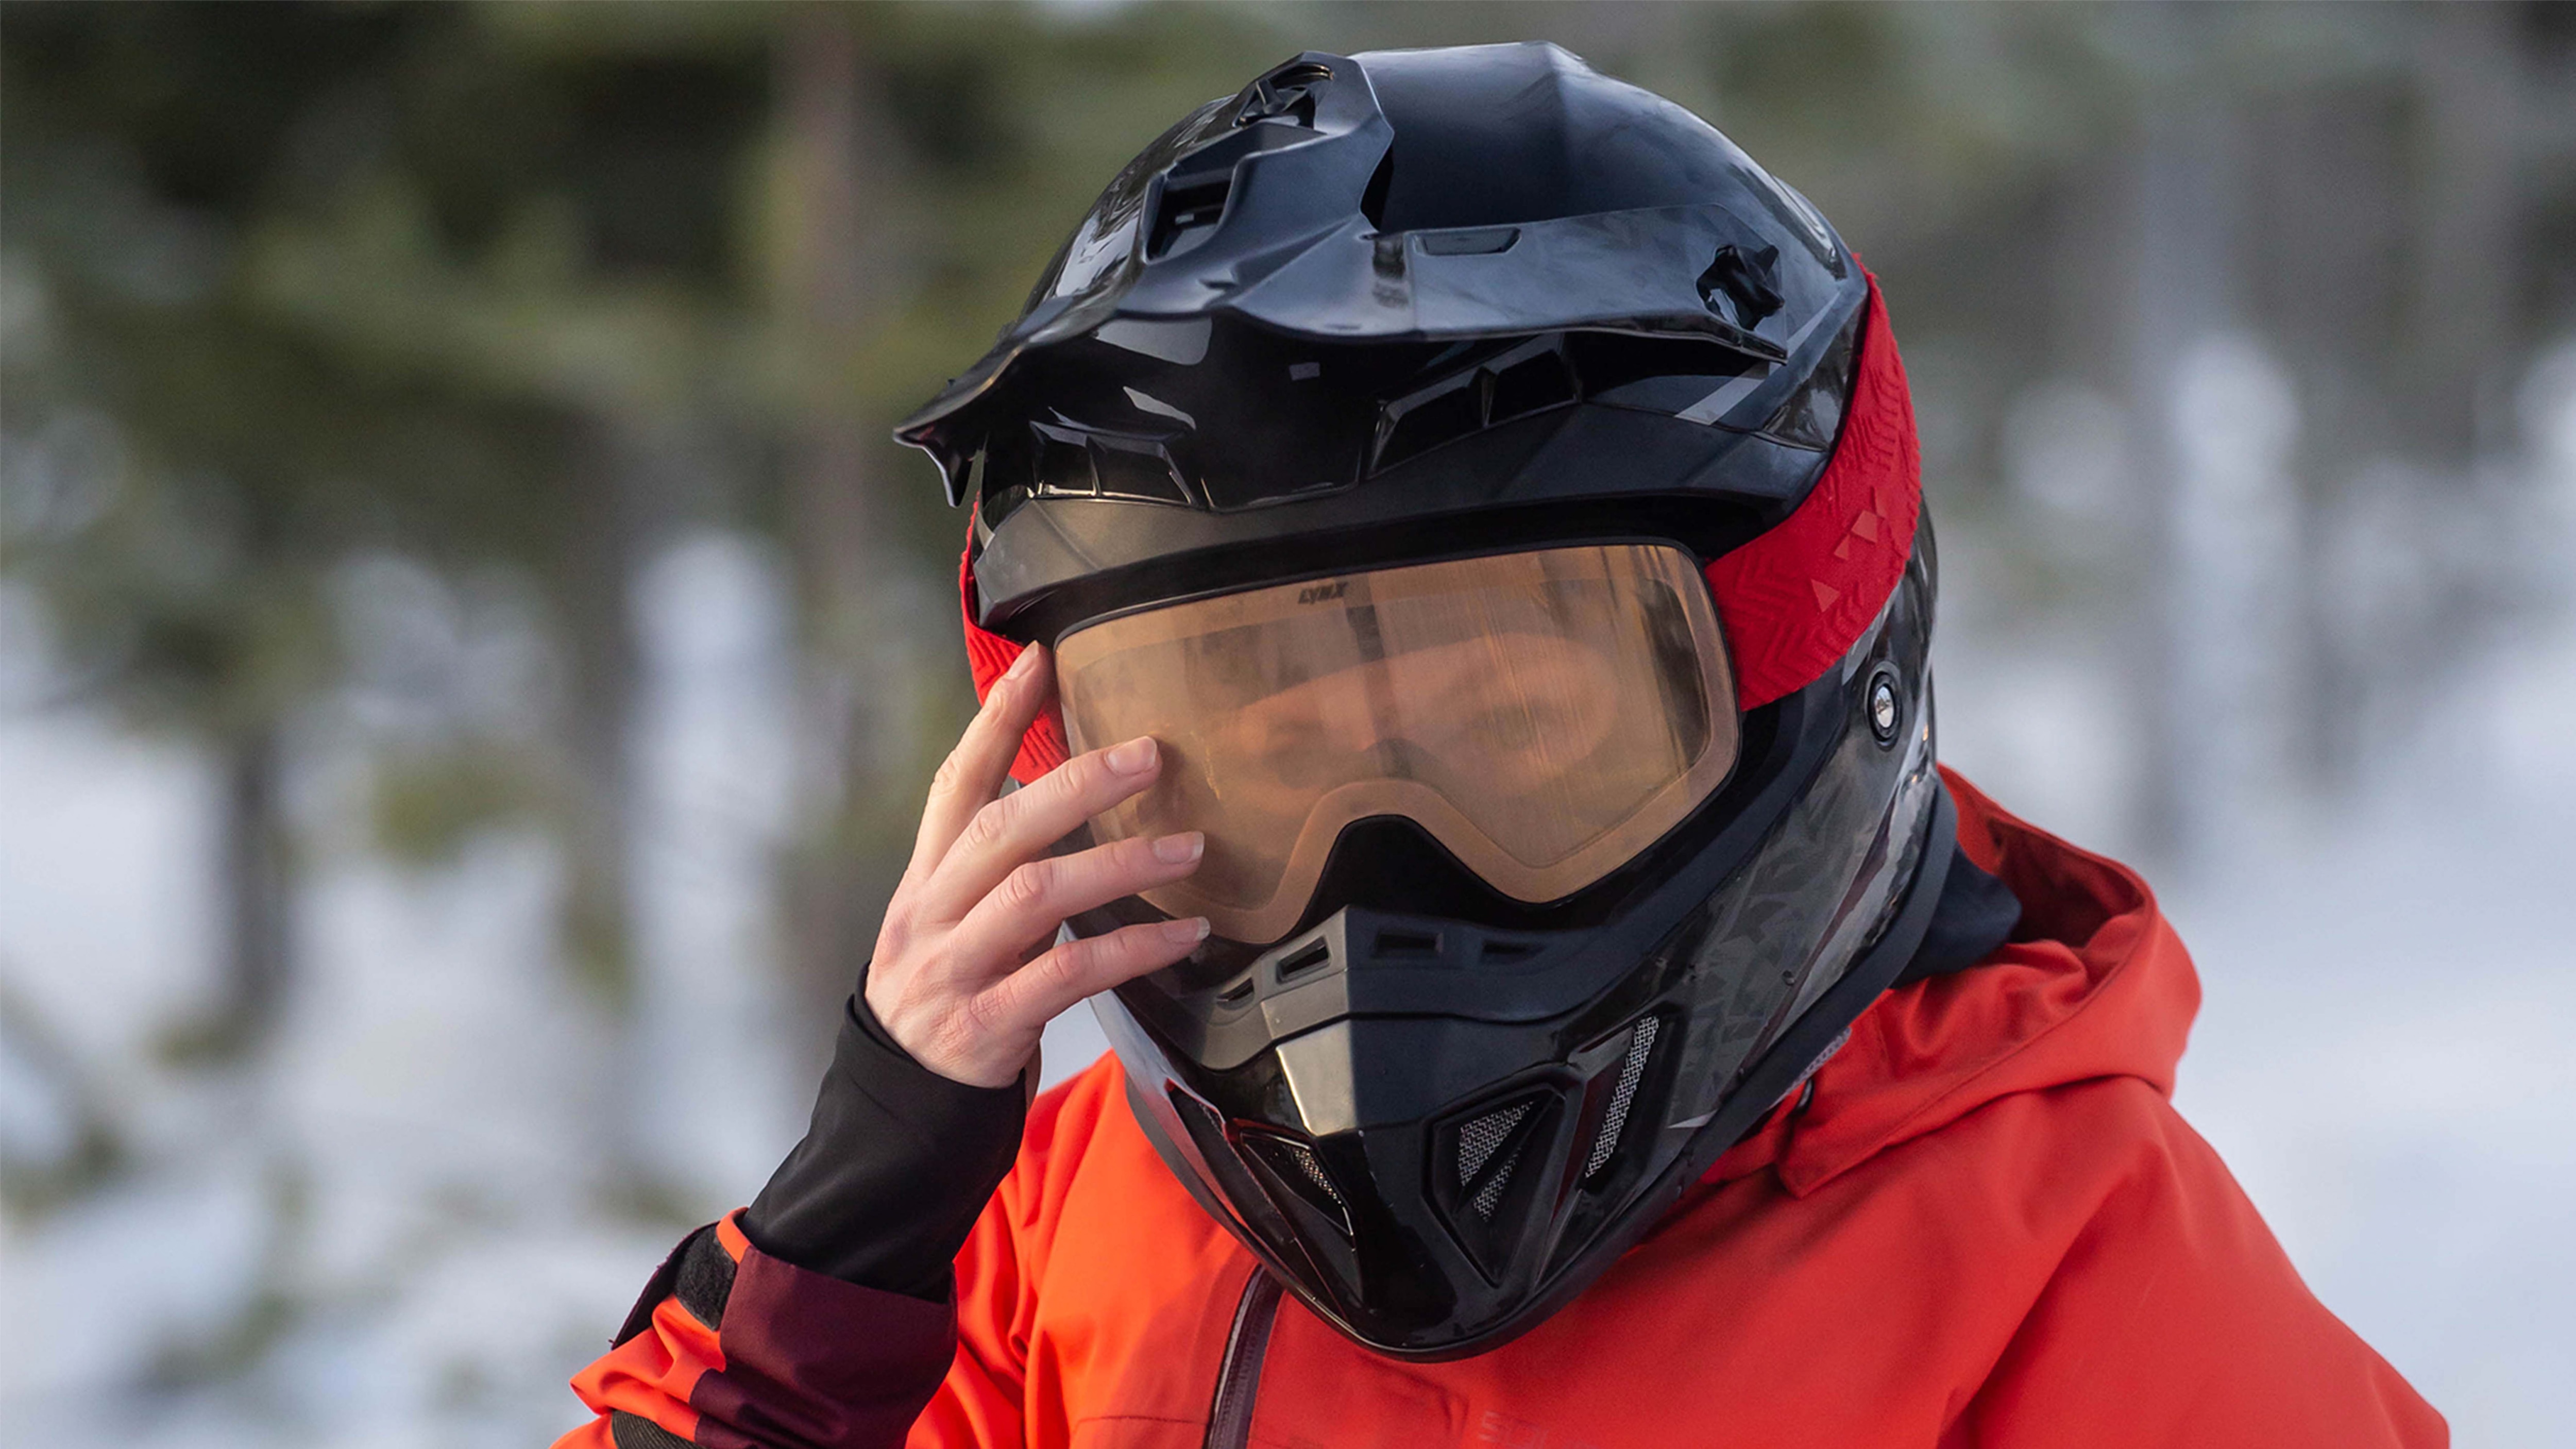 Snowmobile rider wearing goggles and helmet